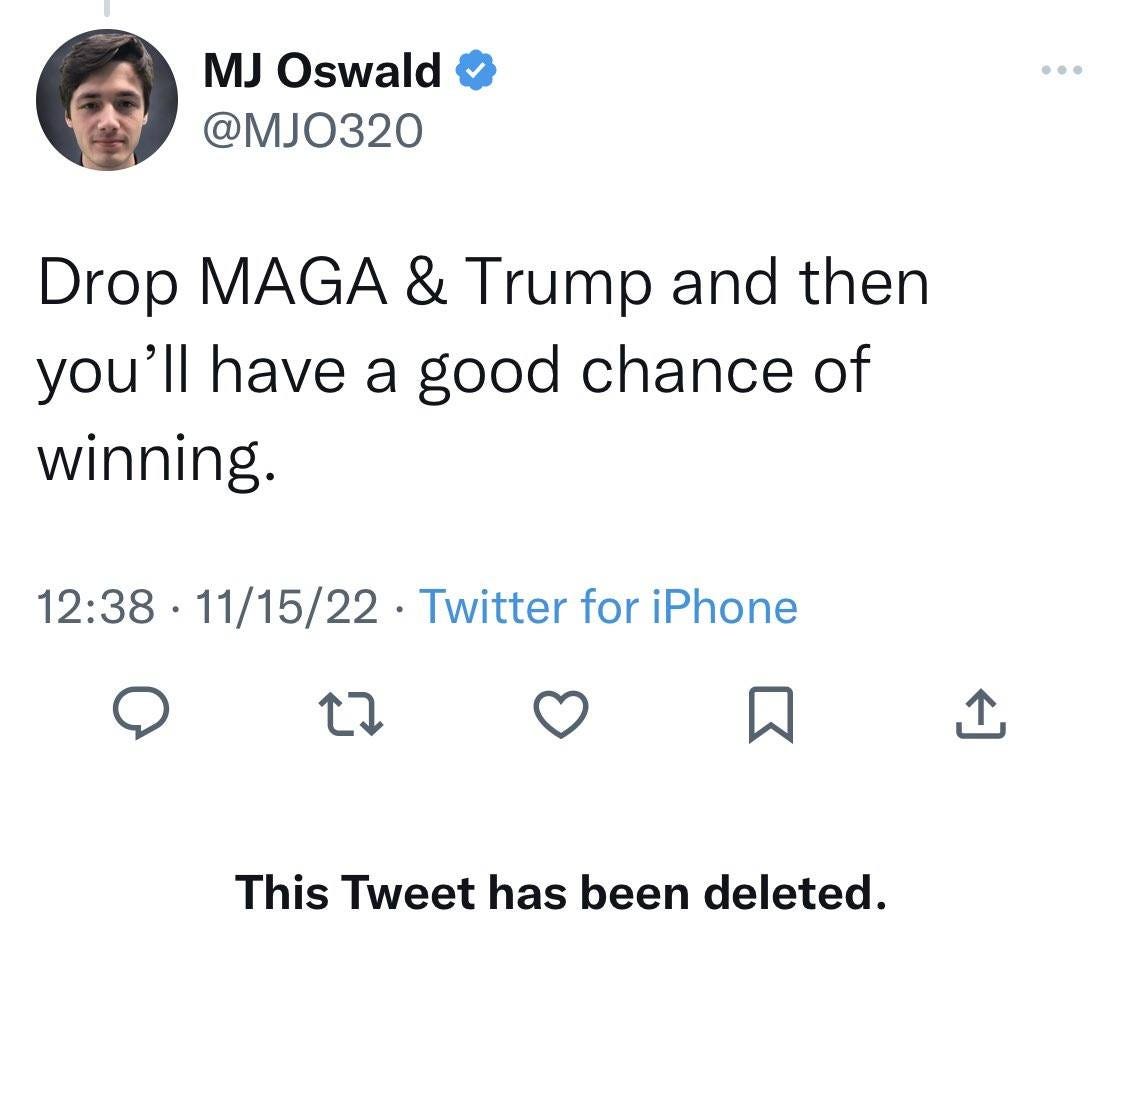 May be a Twitter screenshot of 1 person and text that says 'MJ Oswald @MJO320 Drop MAGA & Trump and then you'll have a good chance of winning. 12:38 11/15/22 Twitter for iPhone This Tweet has been deleted.'